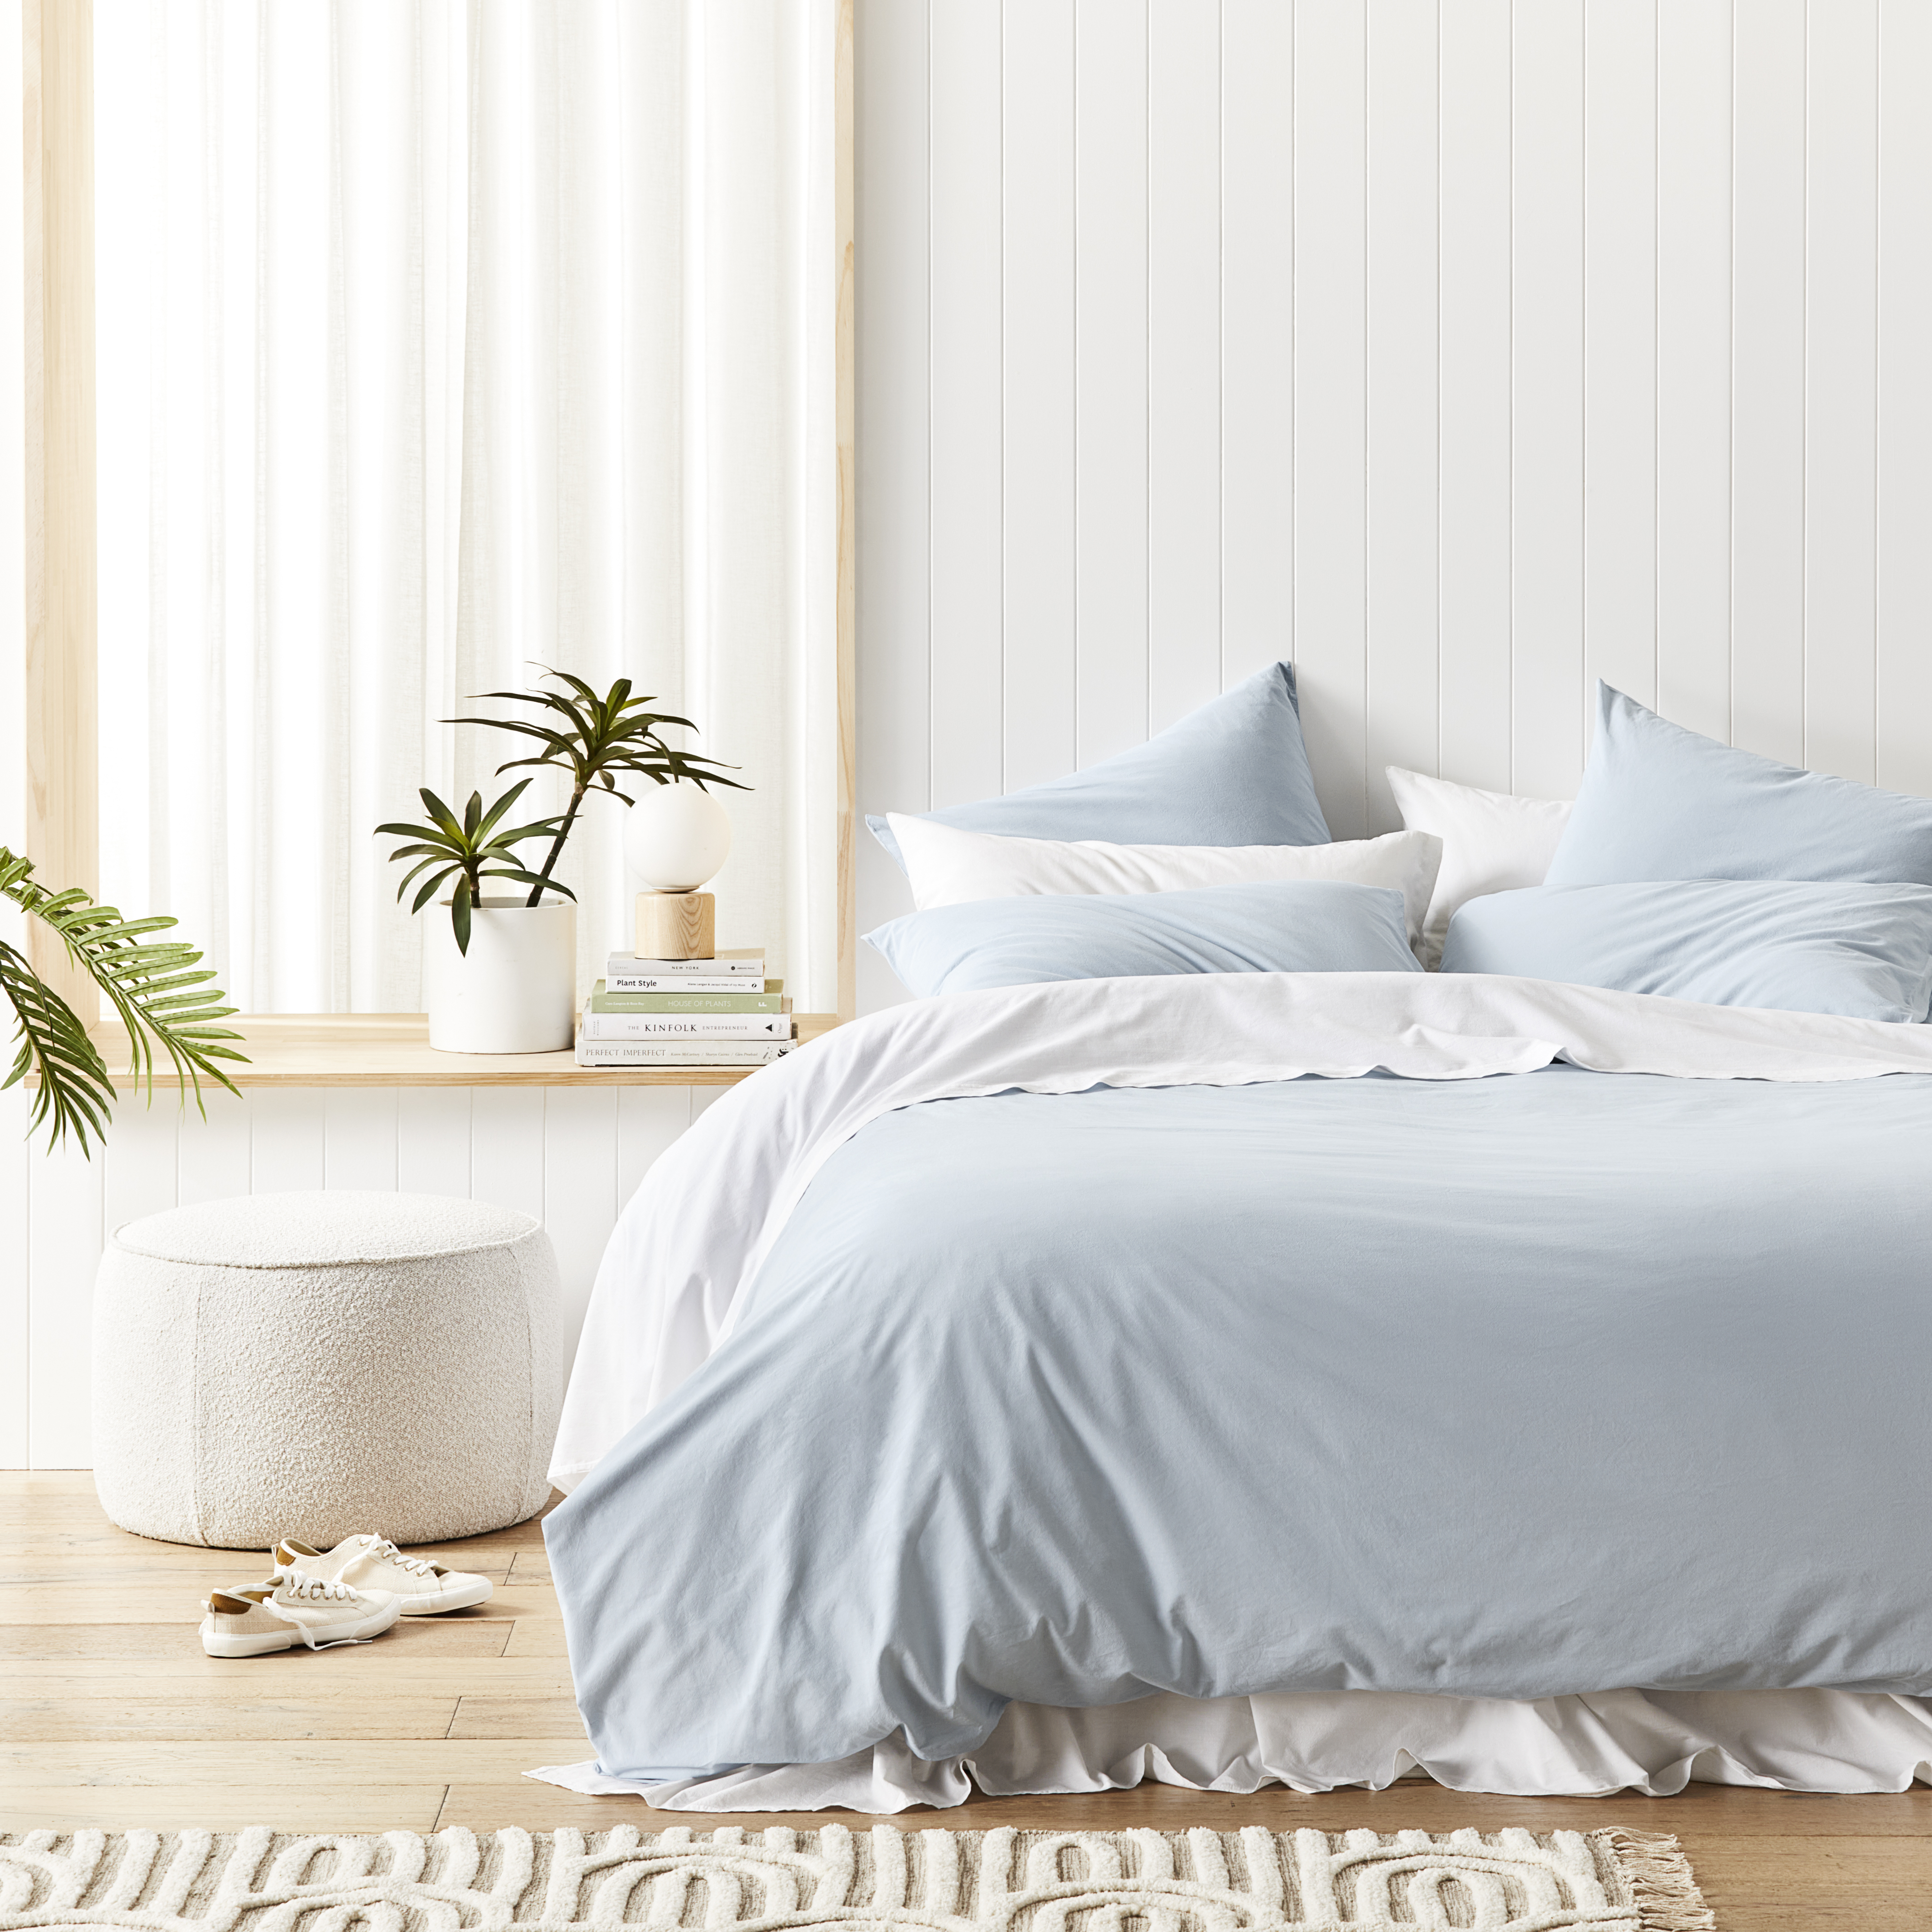 https://www.adairs.com.au/globalassets/13.-ecommerce/03.-product-images/2022_images/bedroom/quilt-covers/54560_iceblue_01.jpg